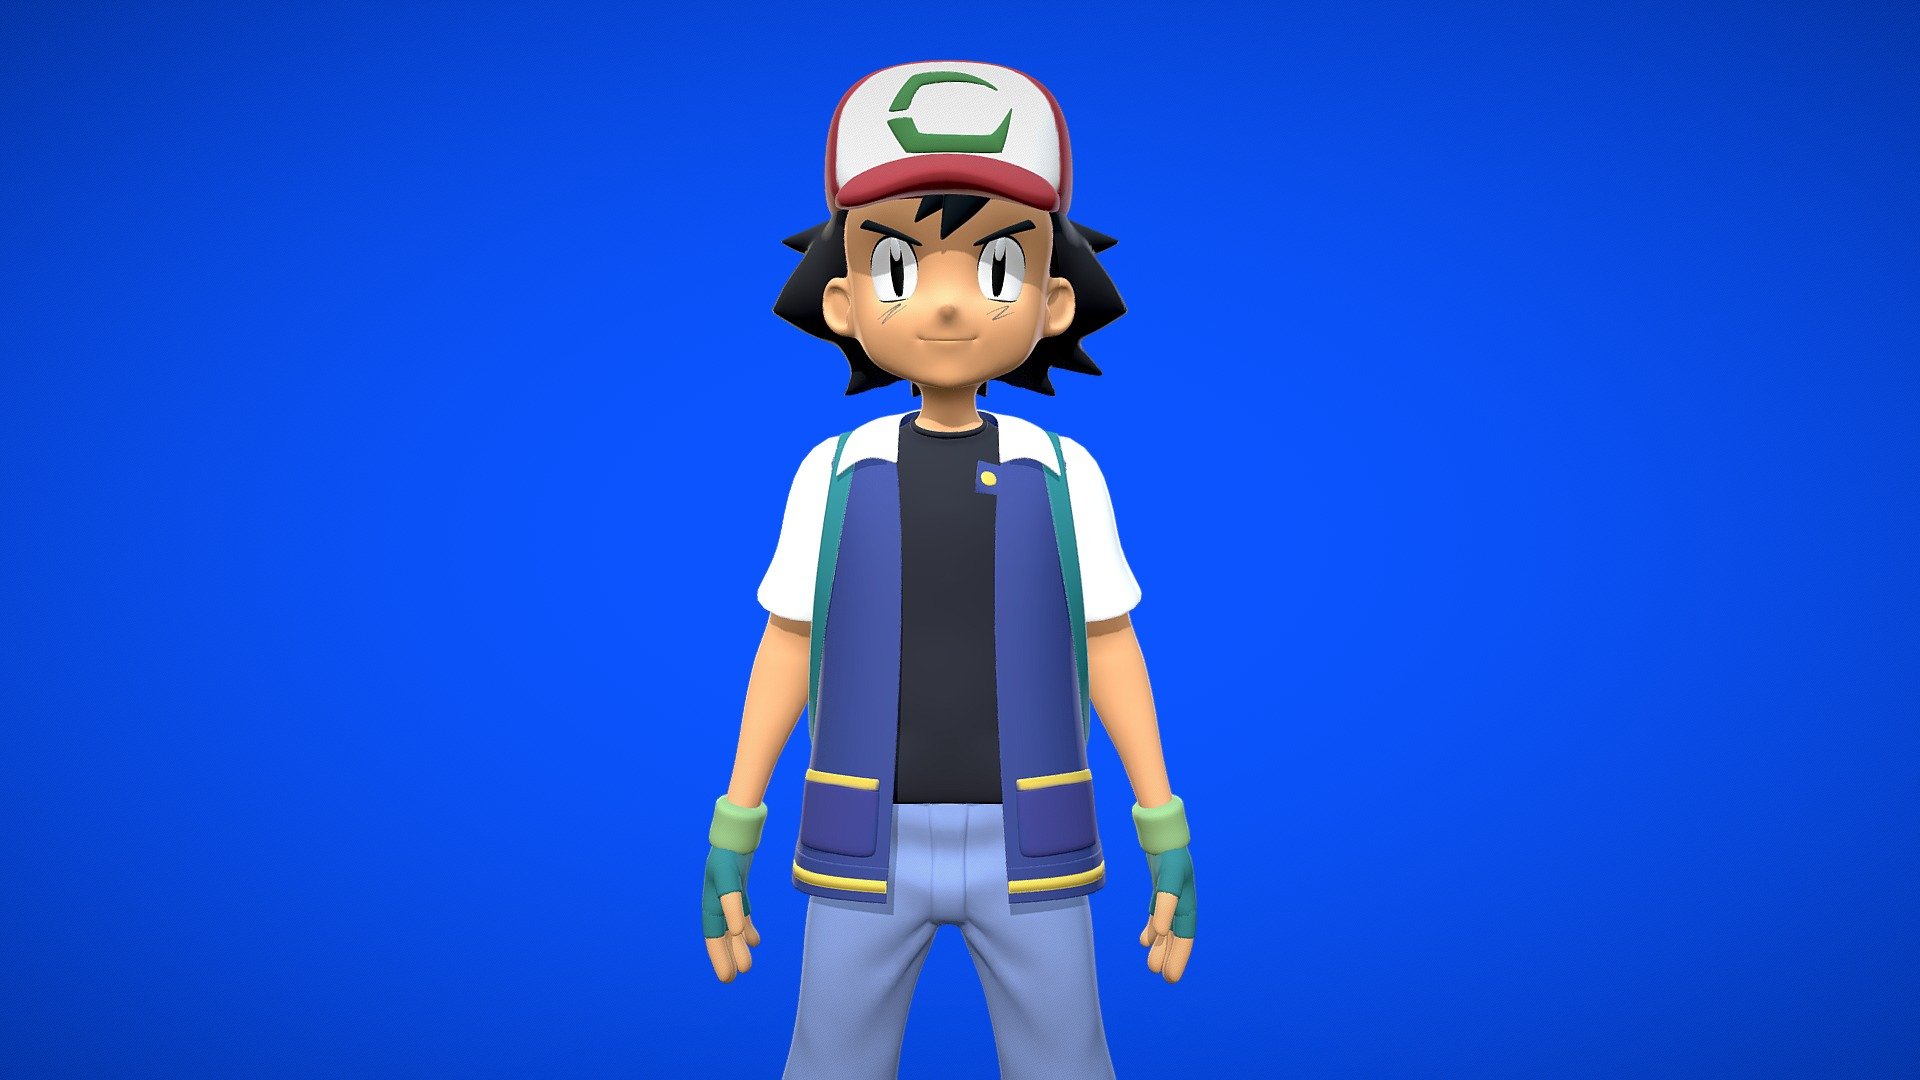 Ash Ketchum (Japanese: サトシ Satoshi) is the main character of the Pokémon anime. He is also the main character of various manga based on the anime, including The Electric Tale of Pikachu, Ash &amp; Pikachu, and Pocket Monsters Diamond &amp; Pearl.

He is a Pokémon Trainer from Pallet Town whose goal is to become a Pokémon Master. His starter Pokémon was a Pikachu that he received from Professor Oak after arriving late at his laboratory. In Pokémon the Series: Sun &amp; Moon, he becomes the first Champion of the Alola region's Pokémon League.

He shares his Japanese name with the creator of the Pokémon franchise, Satoshi Tajiri. His English surname is a pun of the English motto, &ldquo;Gotta catch &lsquo;em all!.